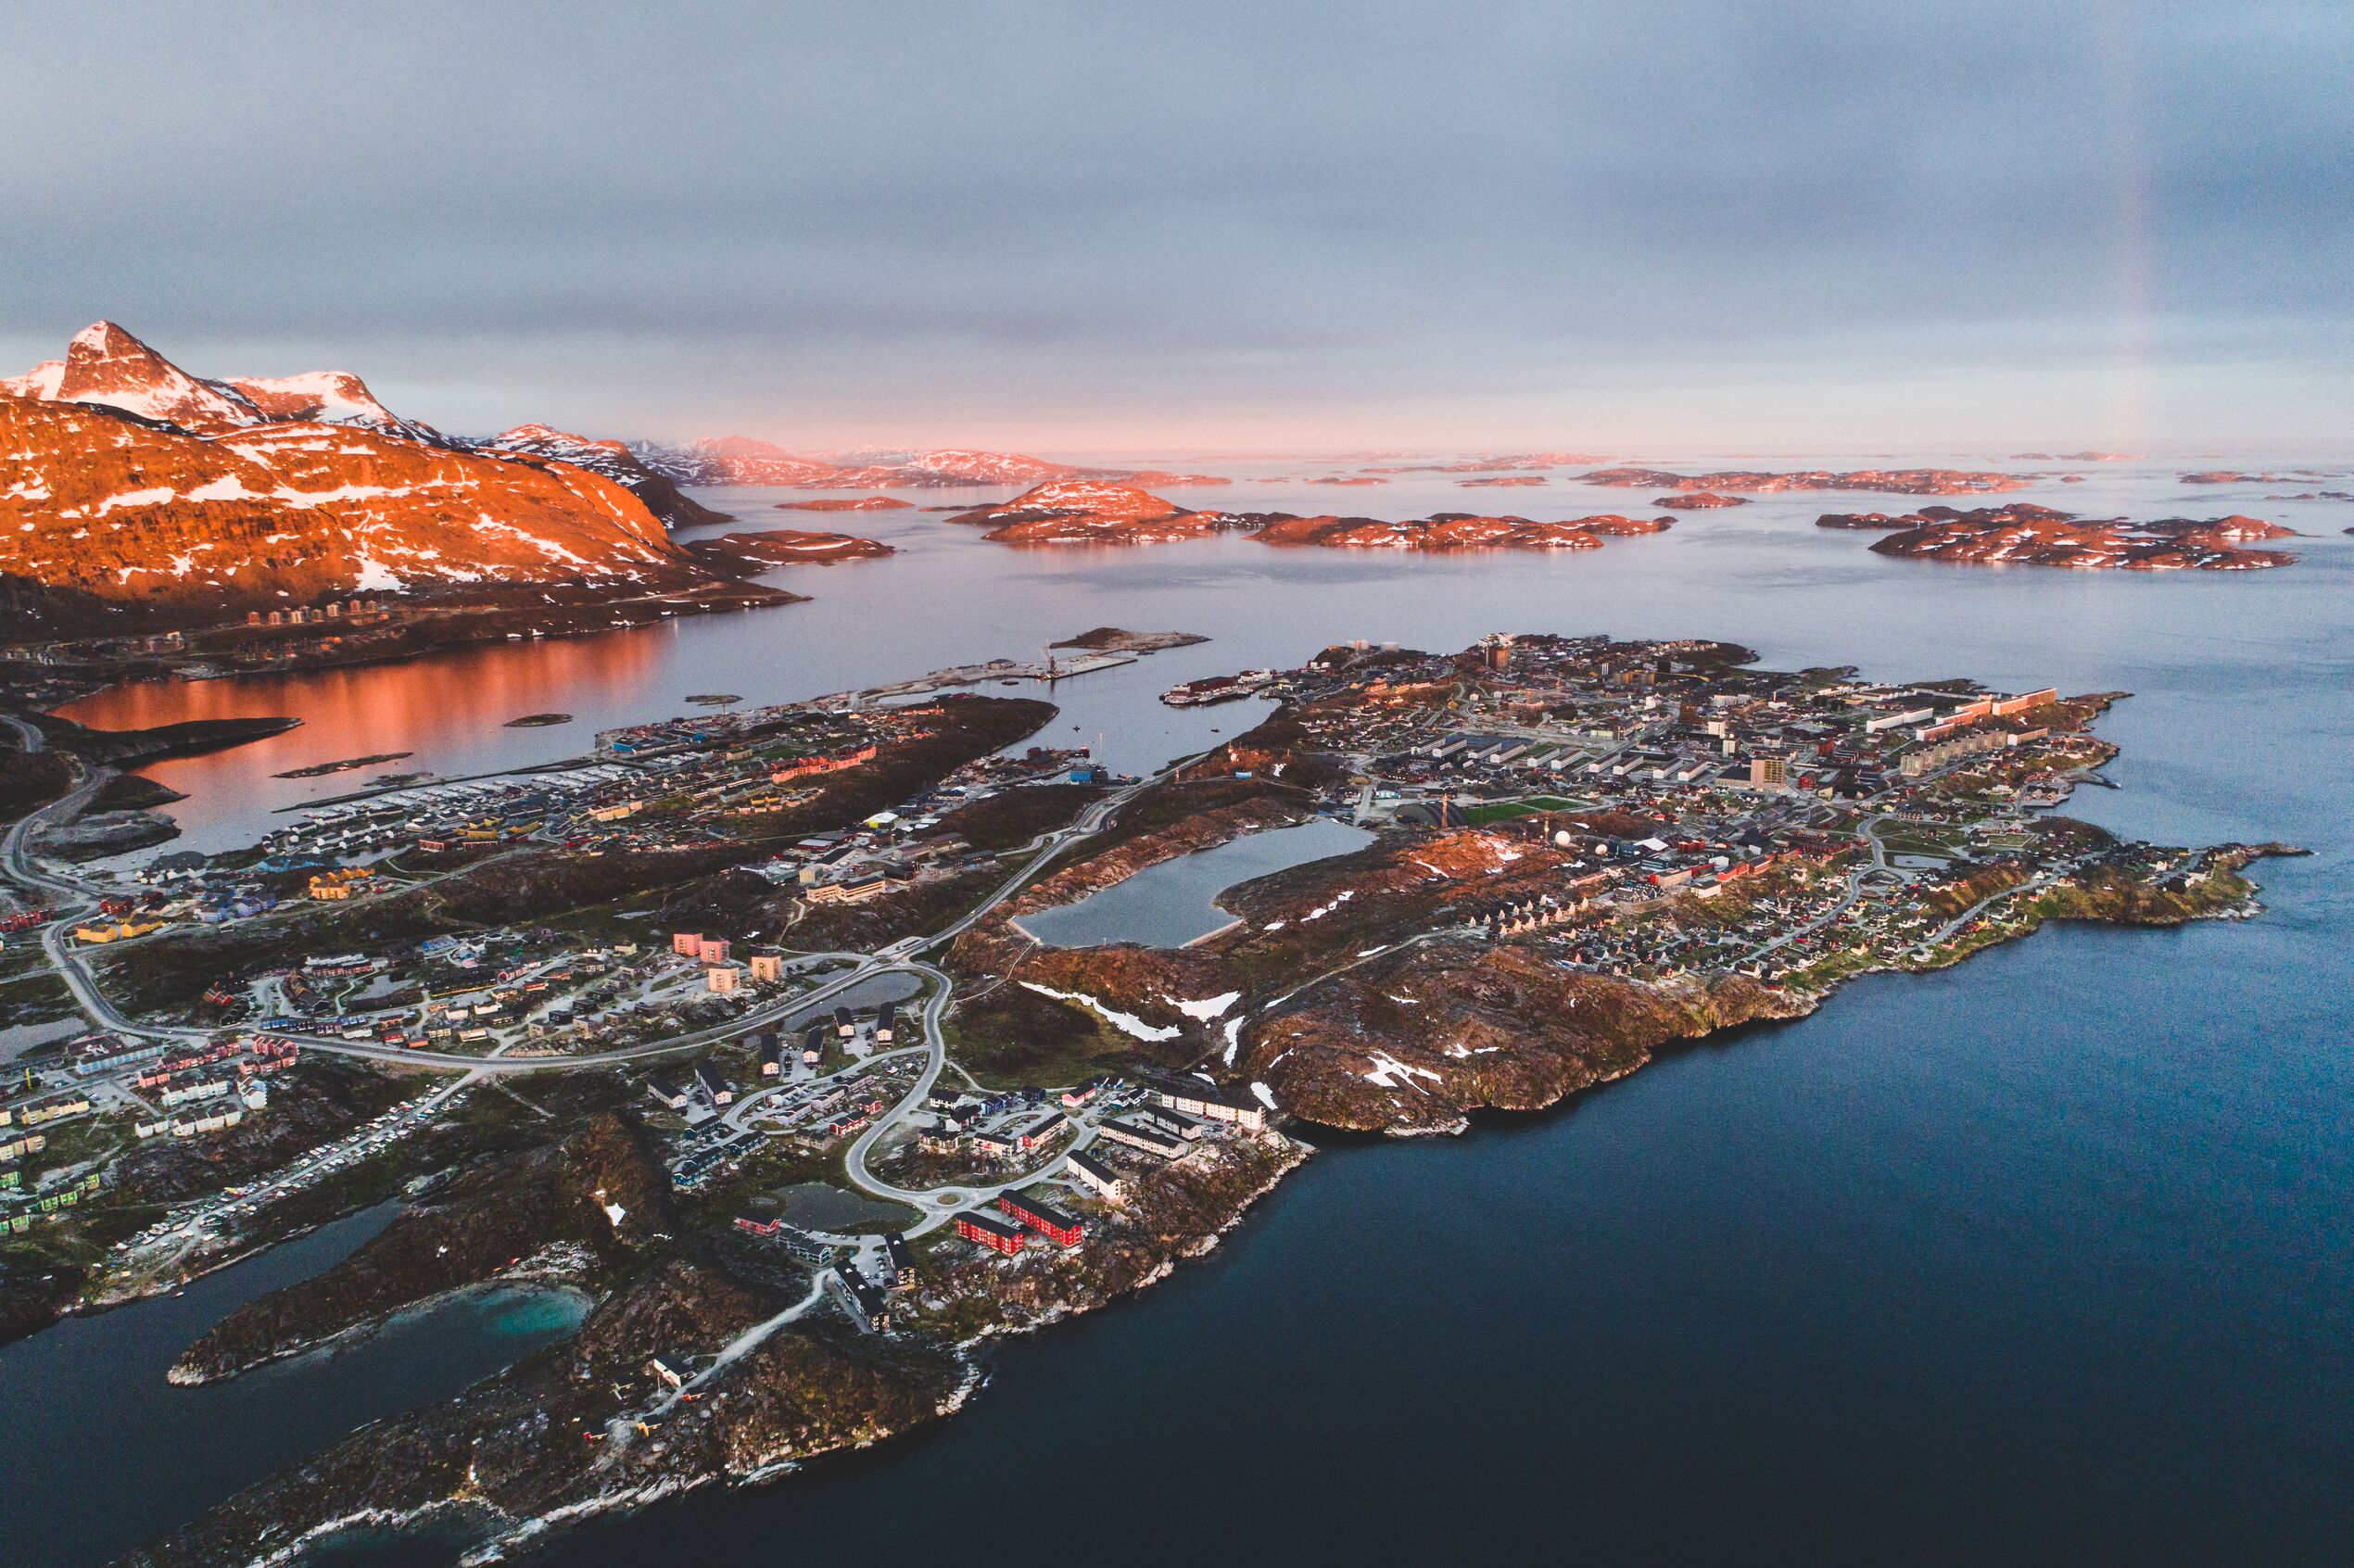 An aerial view of Nuuk in Greenland with the sunset reflecting on the area